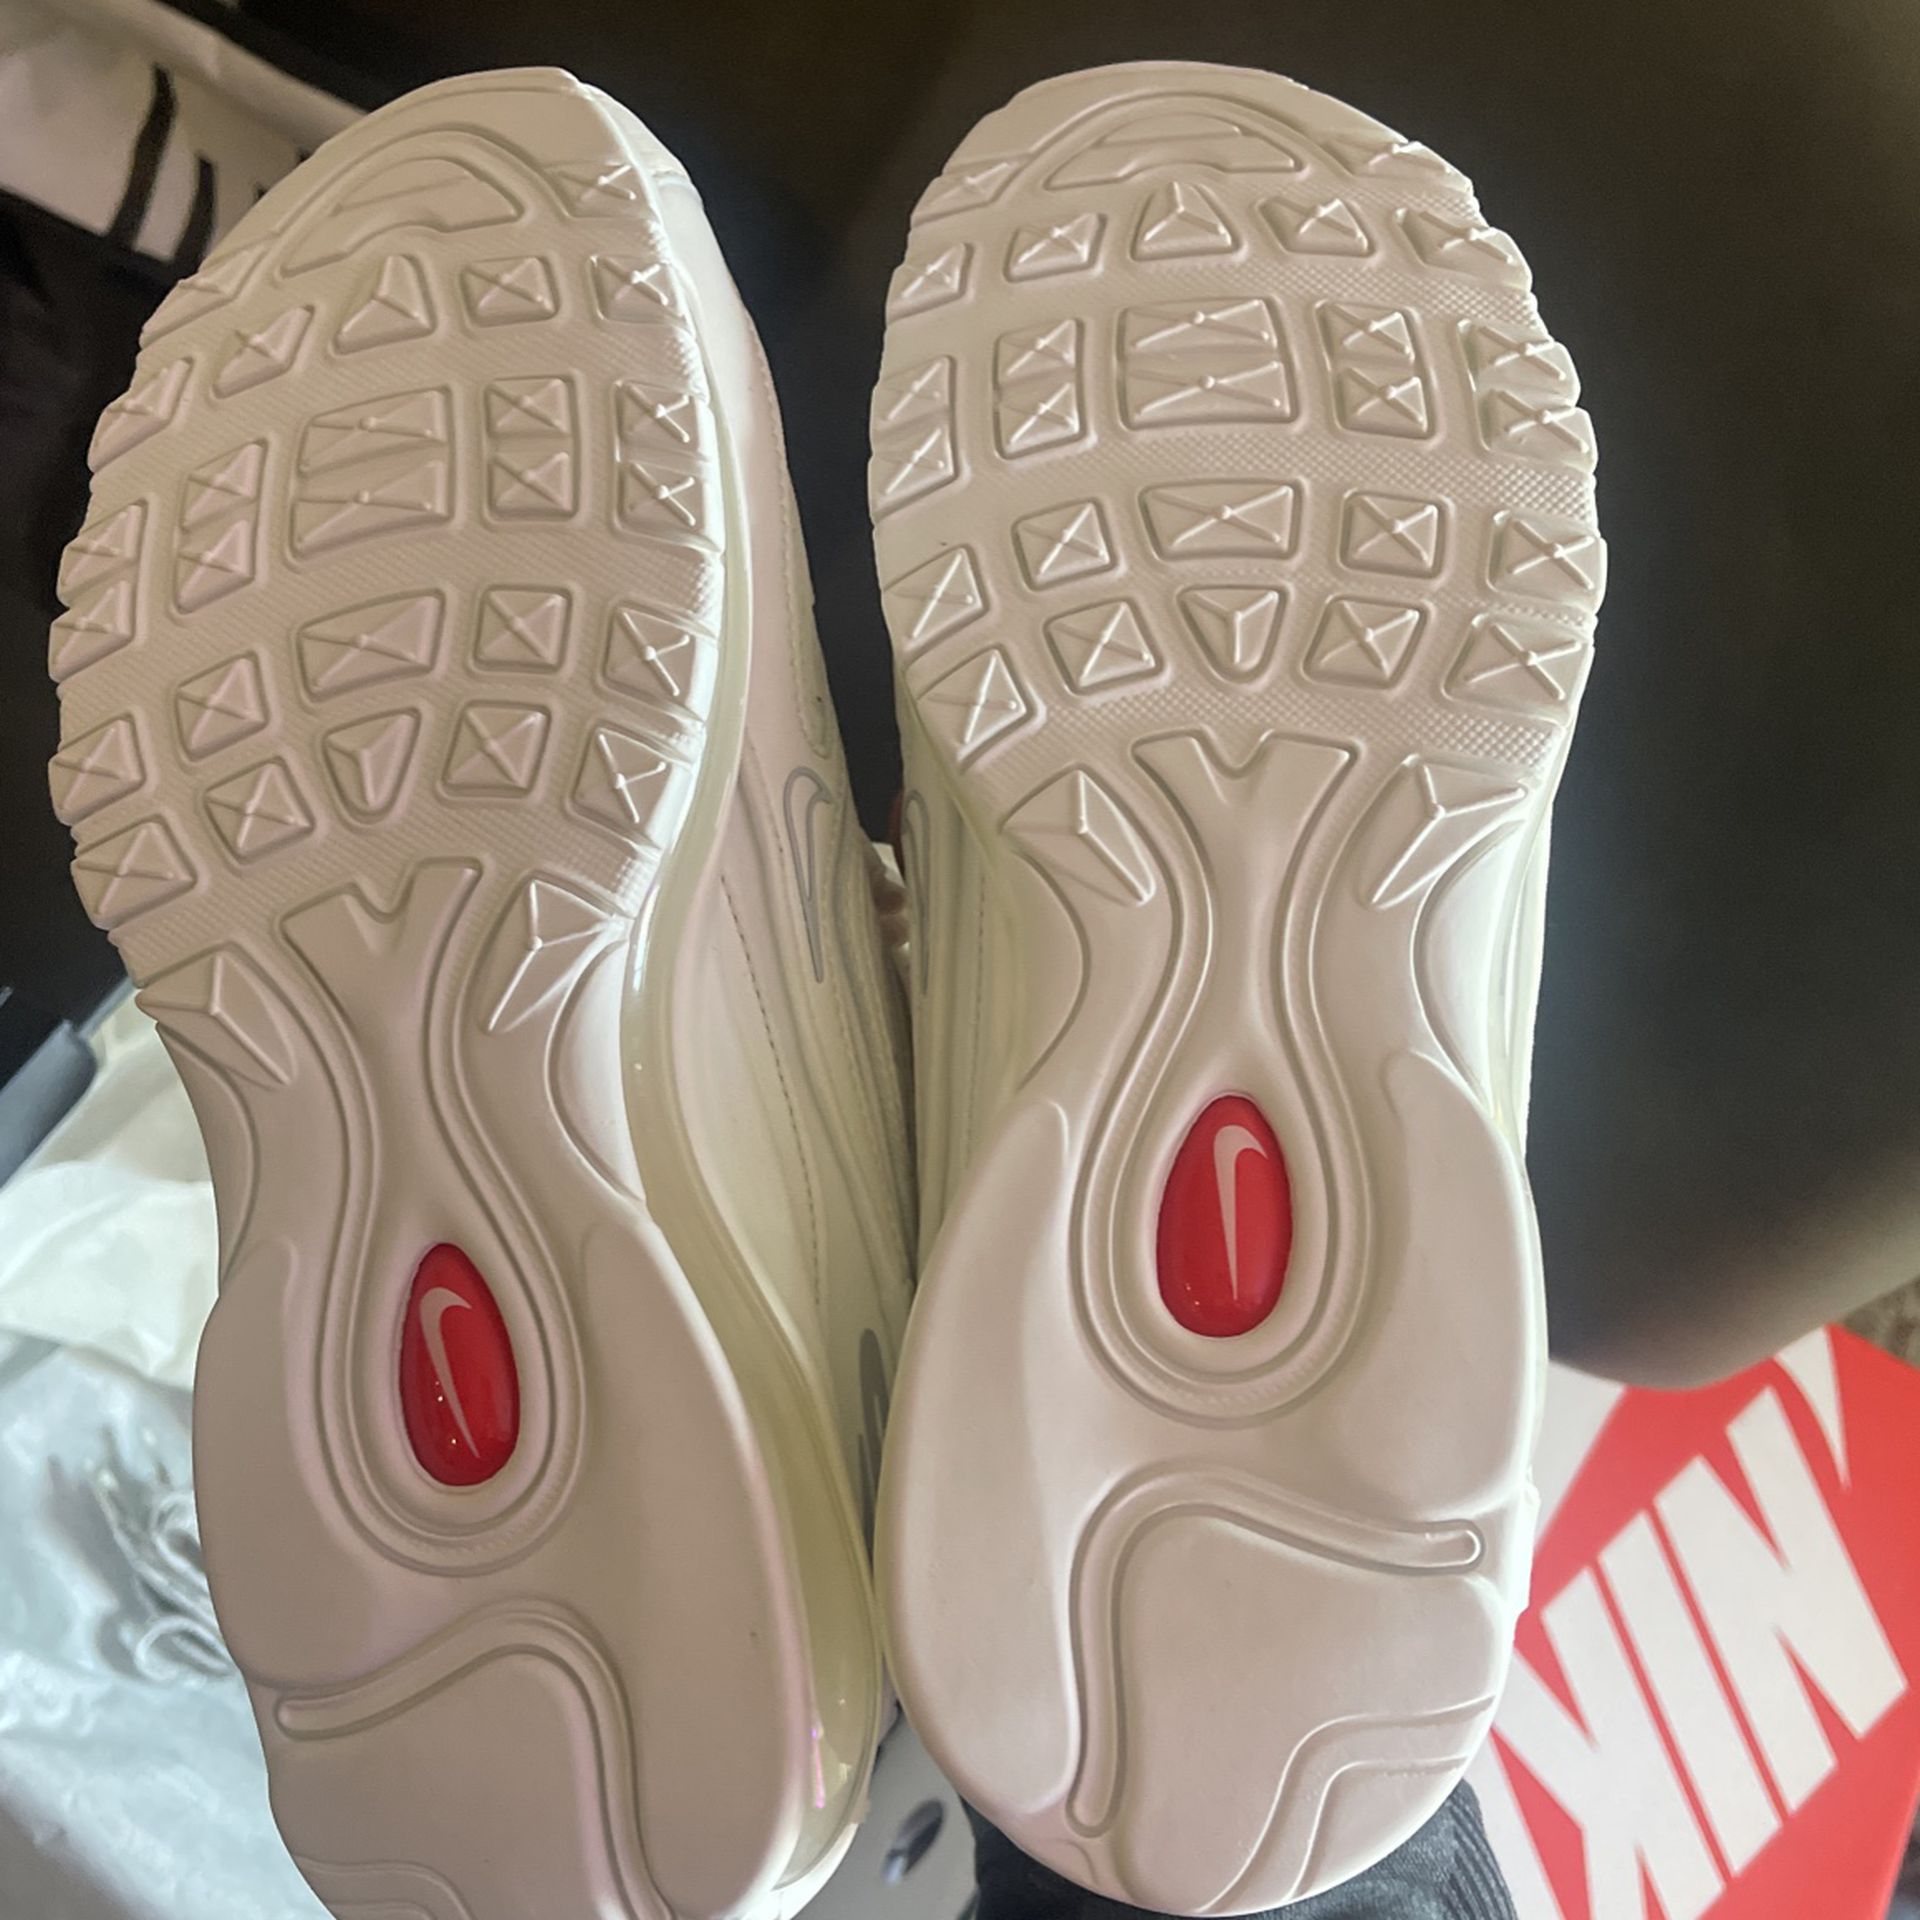 Supreme Nike Air Max 98 TL for Sale in San Jose, CA - OfferUp